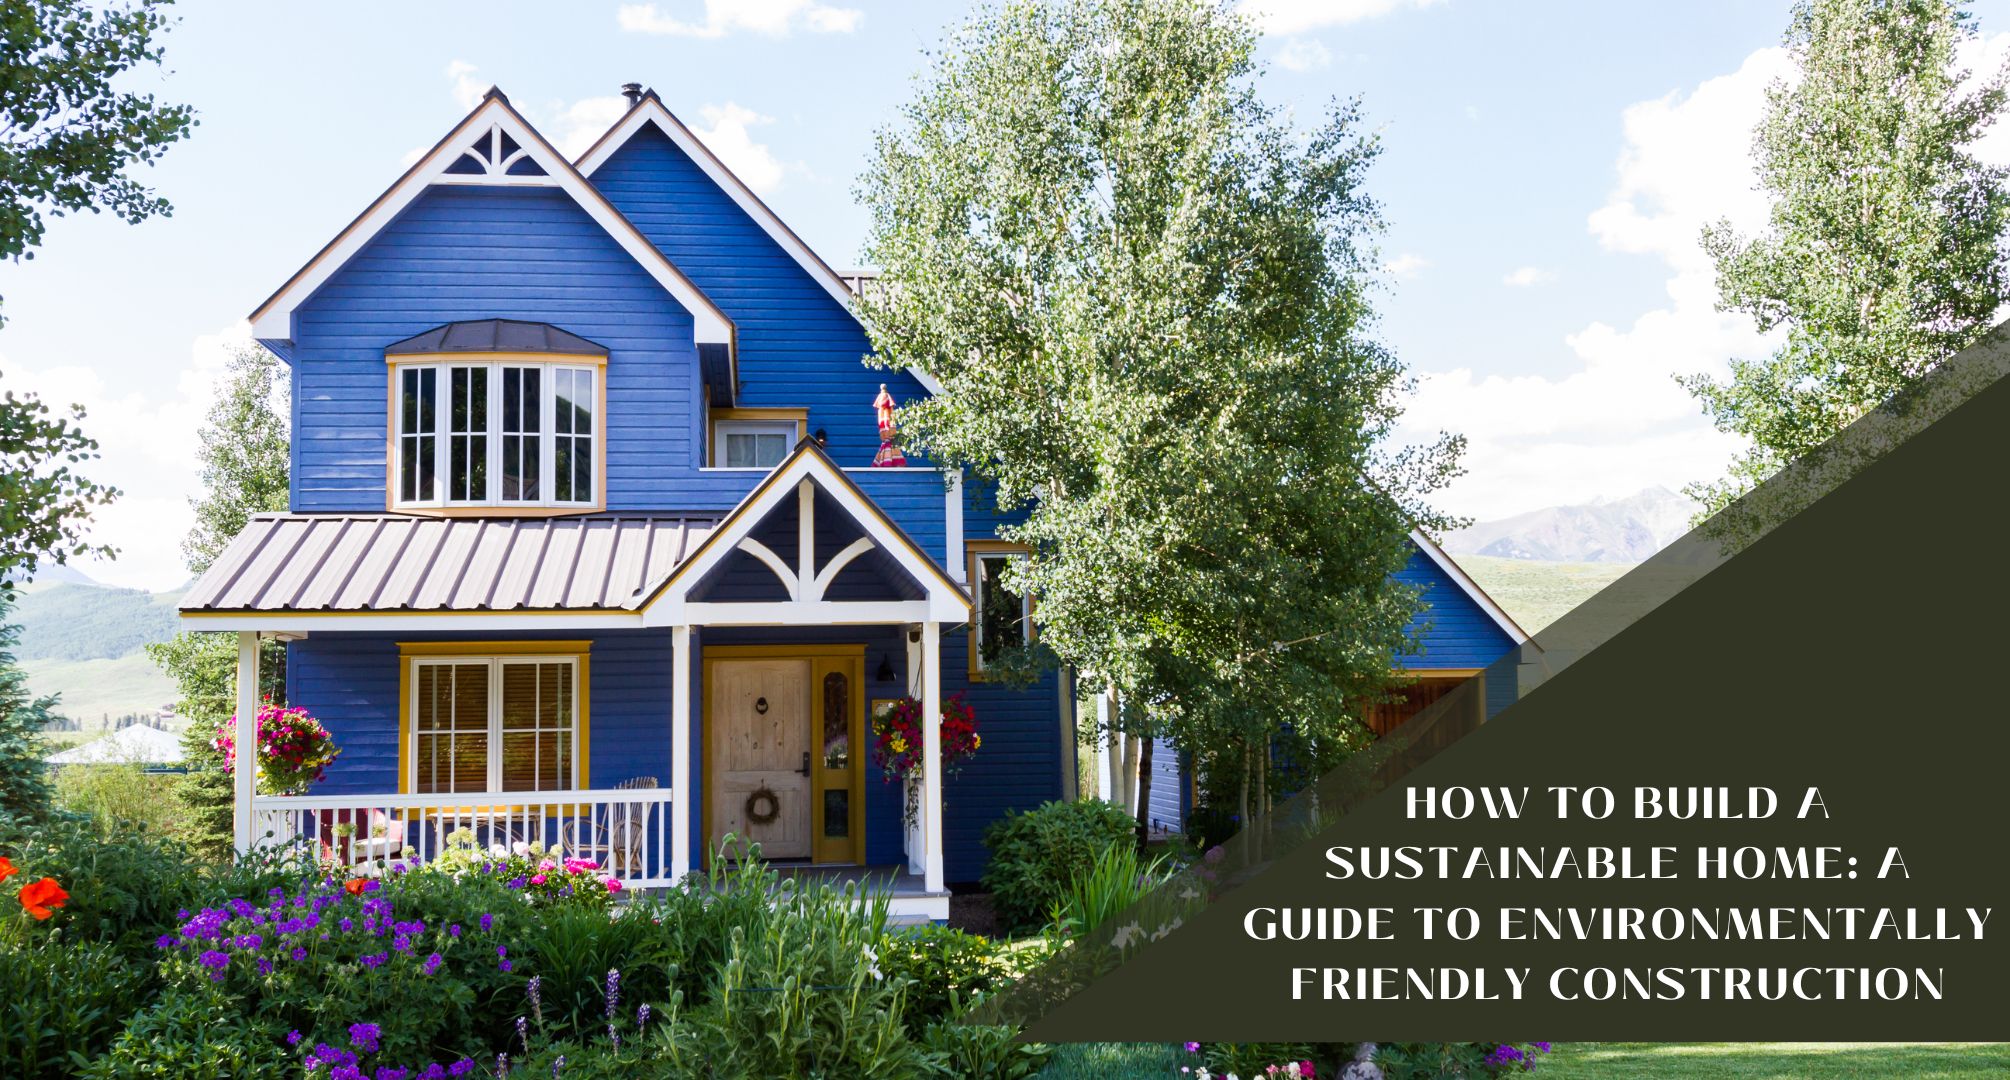 How to Build a Sustainable Home: A Guide to Environmentally Friendly Construction